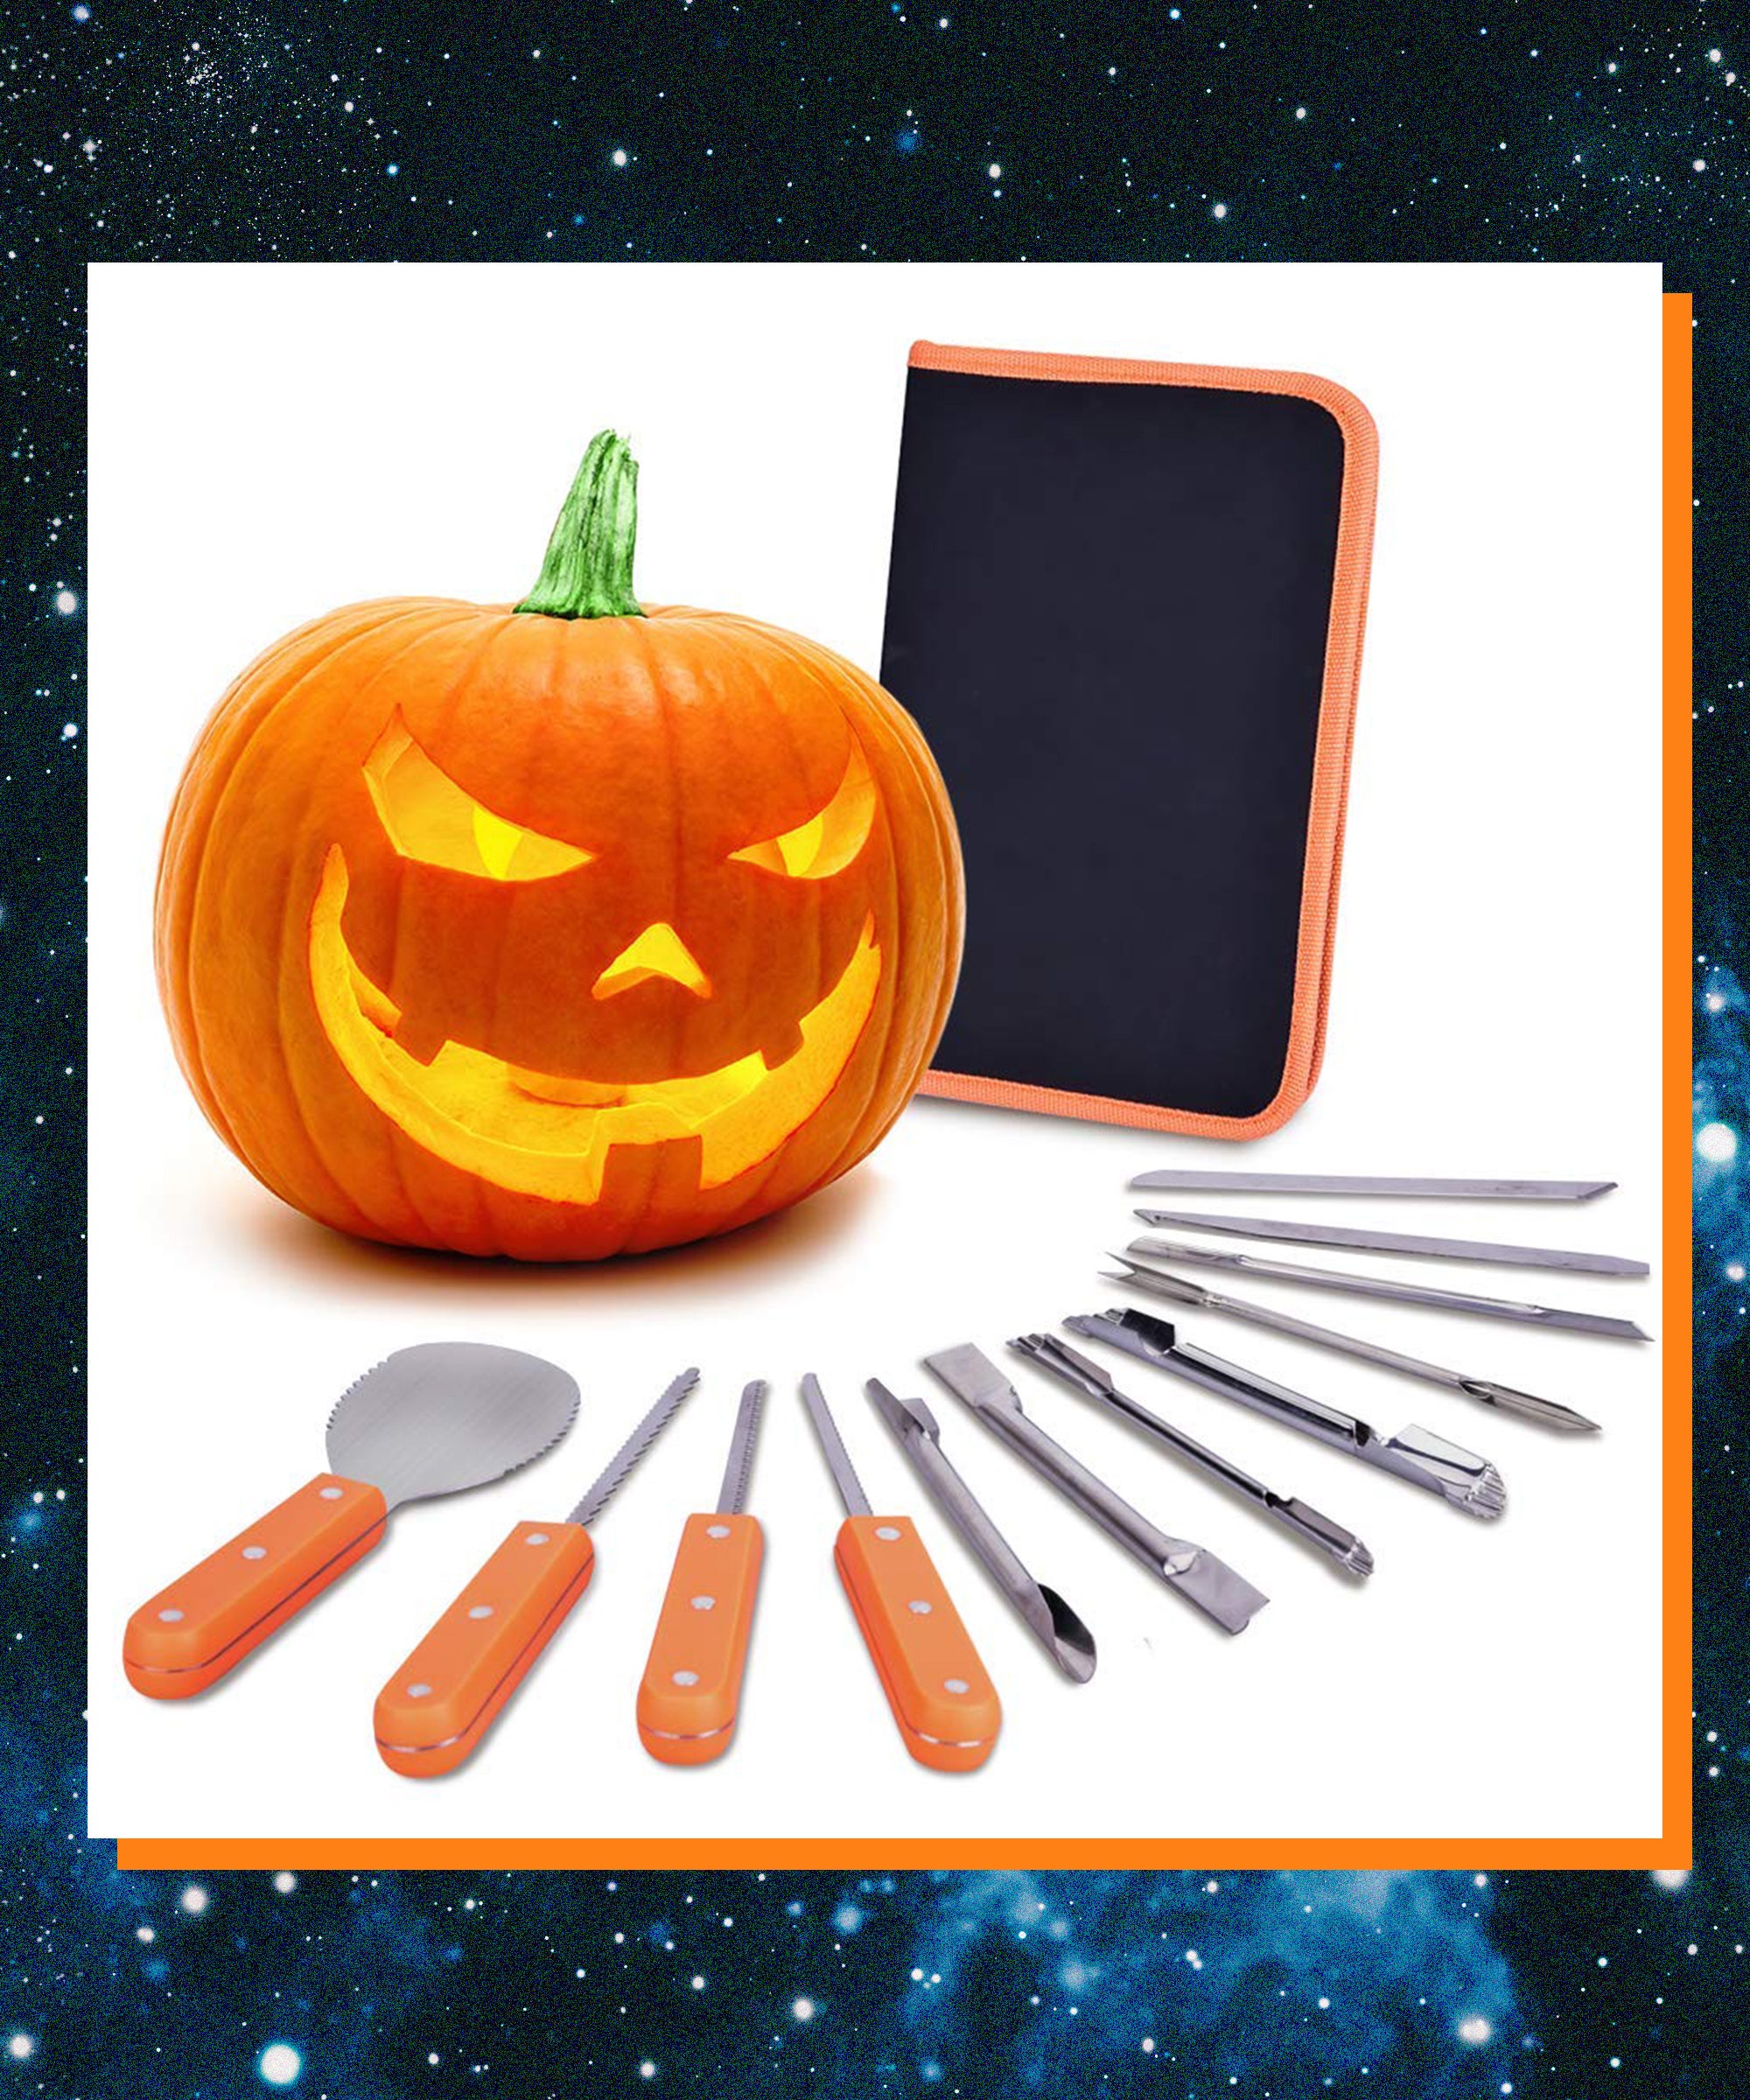 Halloween Pumpkin Carving Kit FEOAMO 11 Pieces Professional Heavy Duty Stainless Steel Jack O Lanterns Pumpkin Carving Tools Set for Halloween Kids Adults Party Decorations with Storage Carrying Bag